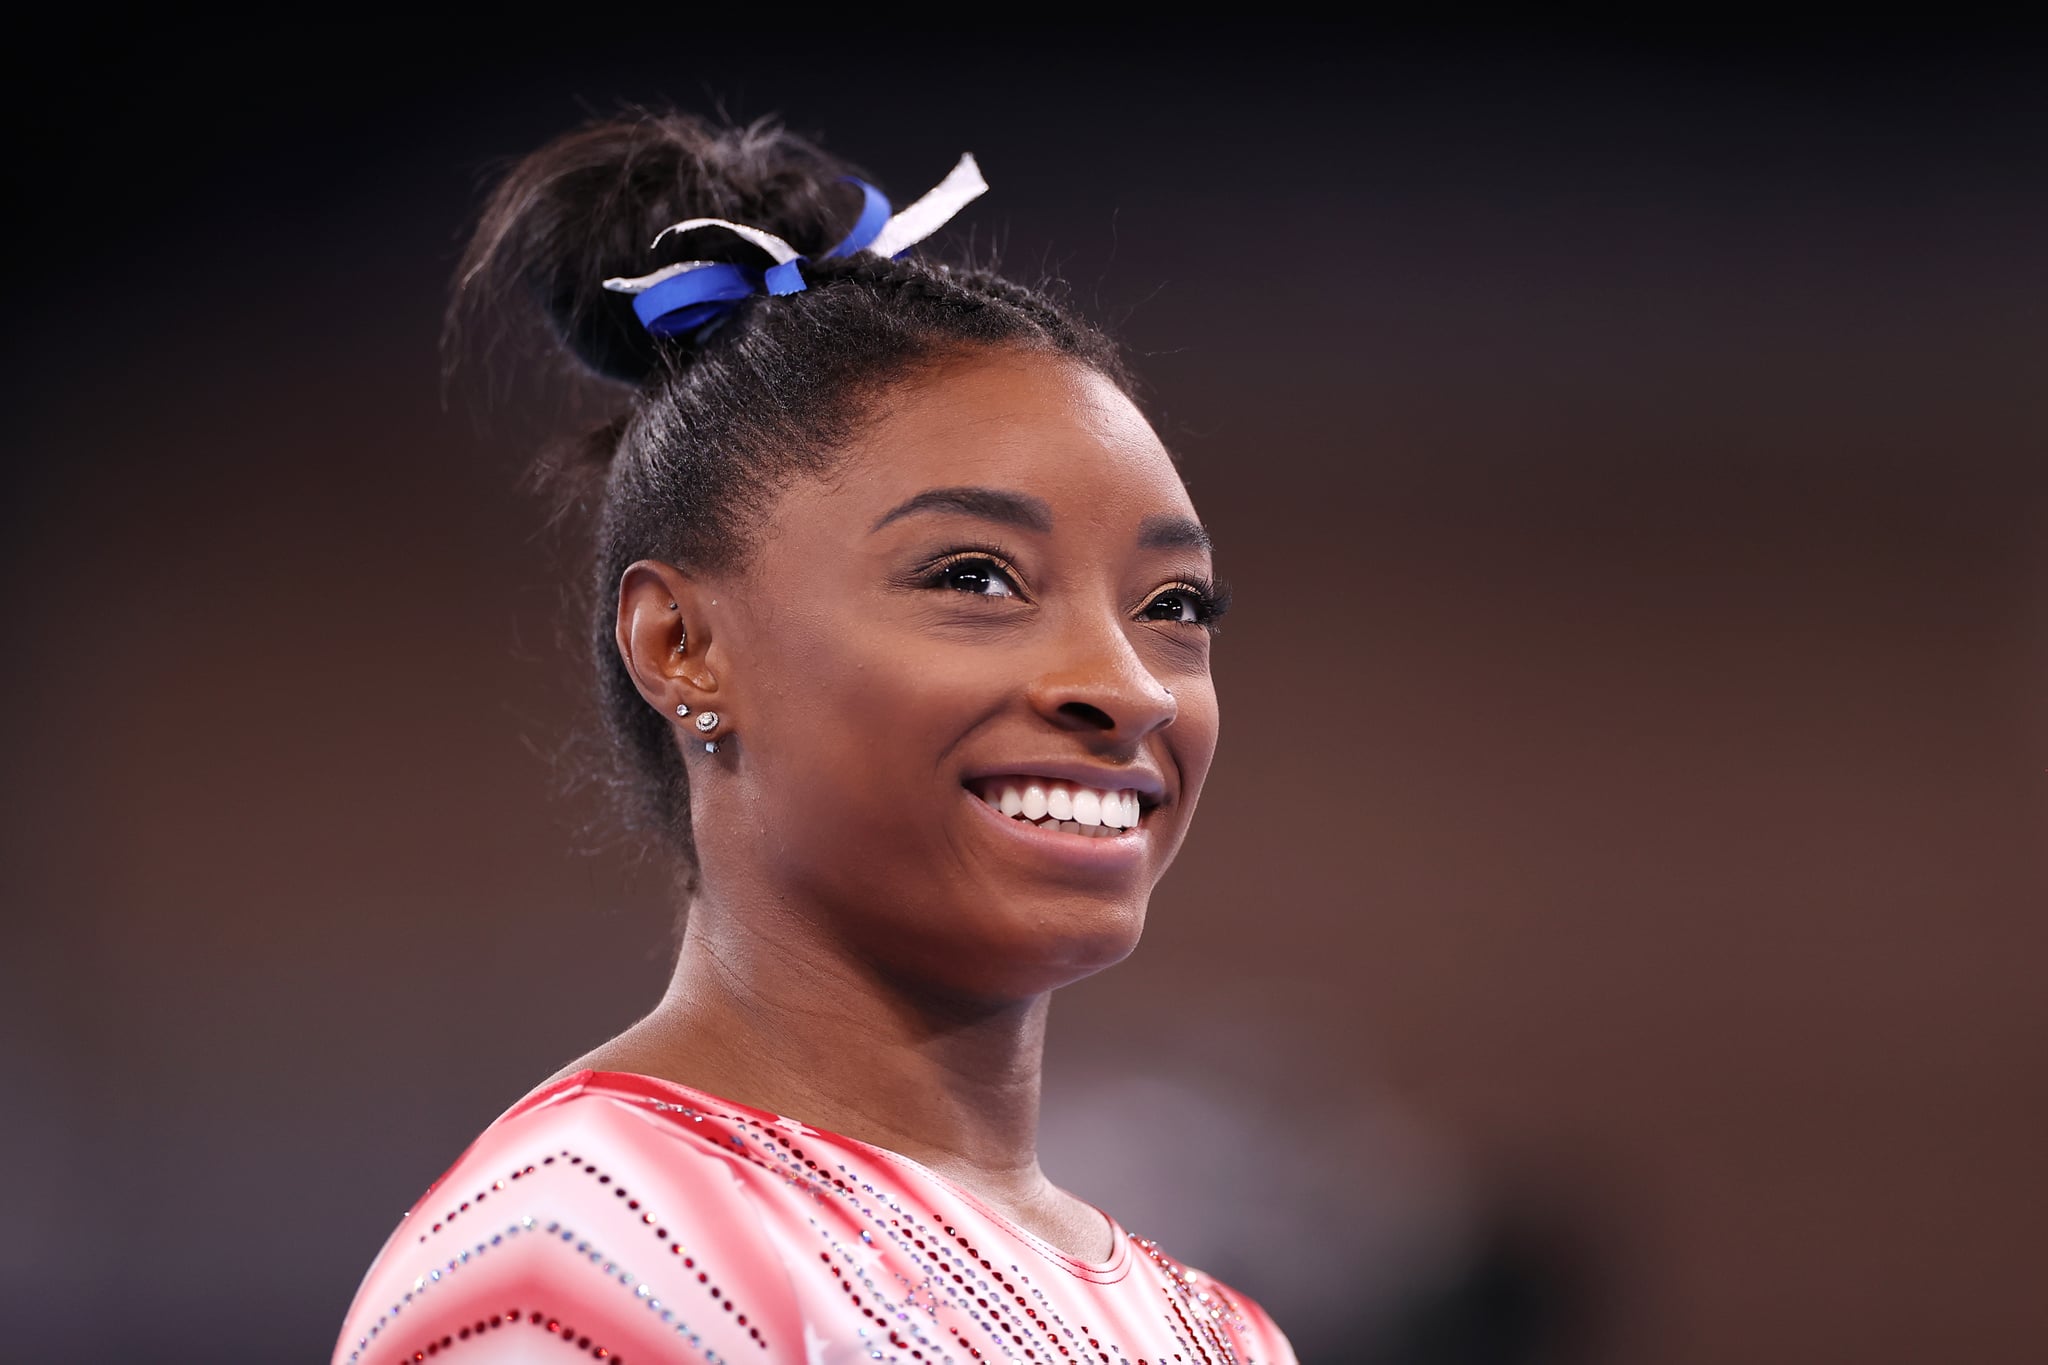 TOKYO, JAPAN - AUGUST 03: Simone Biles of Team United States looks on during warm-ups prior to the Women's Balance Beam Final on day eleven of the Tokyo 2020 Olympic Games at Ariake Gymnastics Centre on August 03, 2021 in Tokyo, Japan. (Photo by Laurence Griffiths/Getty Images)